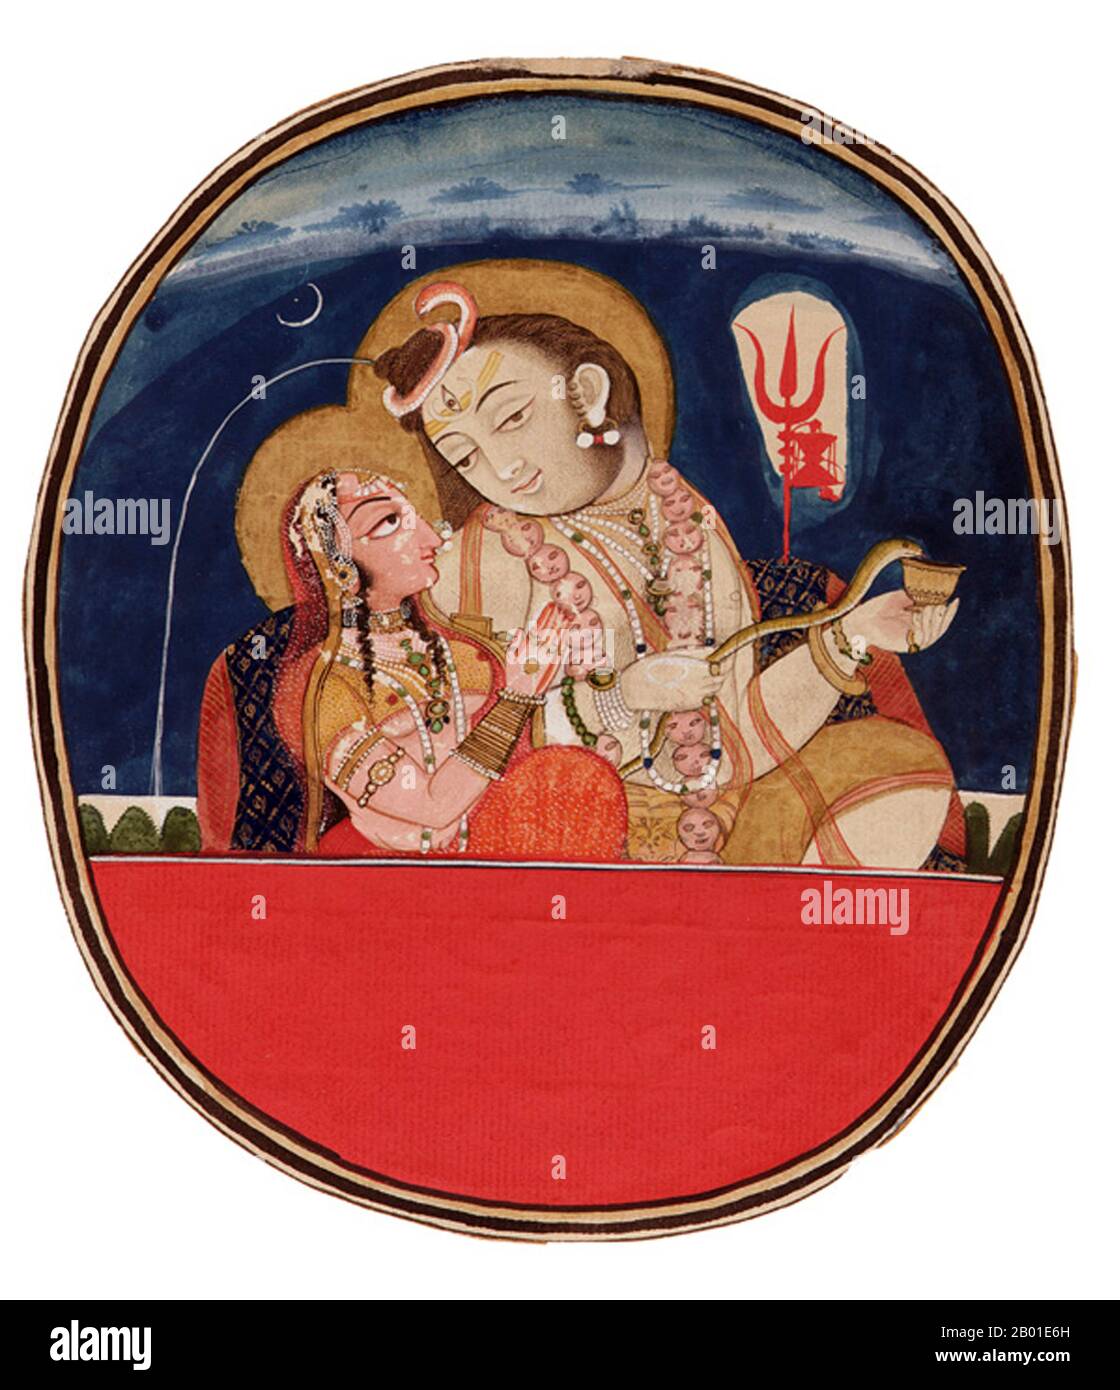 India: Shiva with his consort Parvati, Mewari watercolour miniature by Chokha (fl. 1779-1826), Udaipur or Devgarh, c. 1820.  Shiva (Sanskrit: शिव Śiva, meaning 'auspicious one' ) is a major Hindu deity, and is the destroyer god or transformer among the Trimurti, the Hindu Trinity of the primary aspects of the divine.  Shiva is depicted three-eyed, the  waters of the River Ganges poring from his top-knot.  Parvati (Sanskrit: पार्वती (IAST: Pārvatī)) is a Hindu goddess. Parvati is Shakti herself, considered as wife of Shiva, albeit the gentle aspect of Mahadevi, the Supreme Goddess. Stock Photo